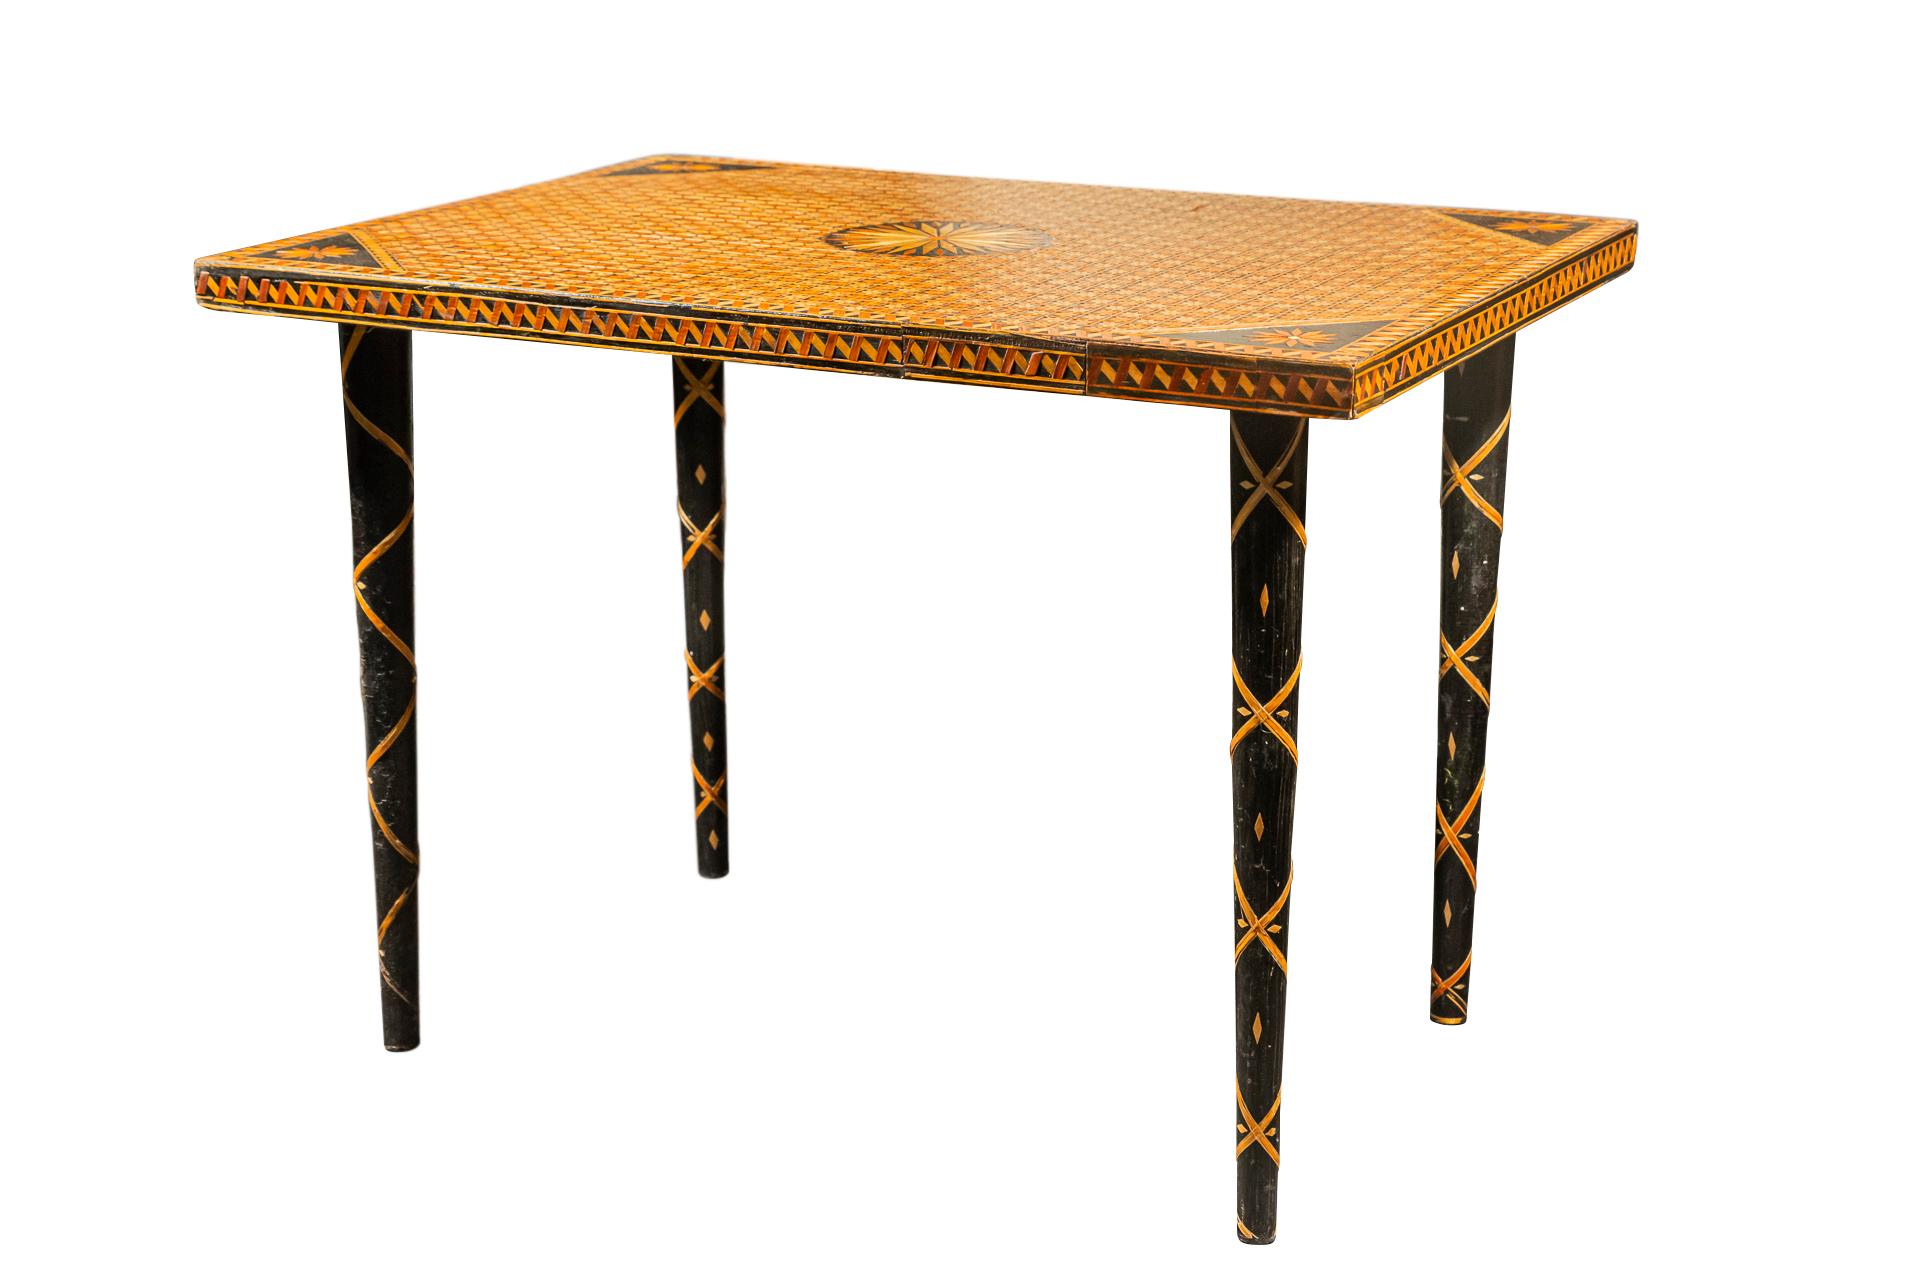 Coffee table in straw marquetry, 
Foot in the shape of fasces,
France, circa 1960.

Measures: Width 70 cm, depth 51 cm, height 51 cm.